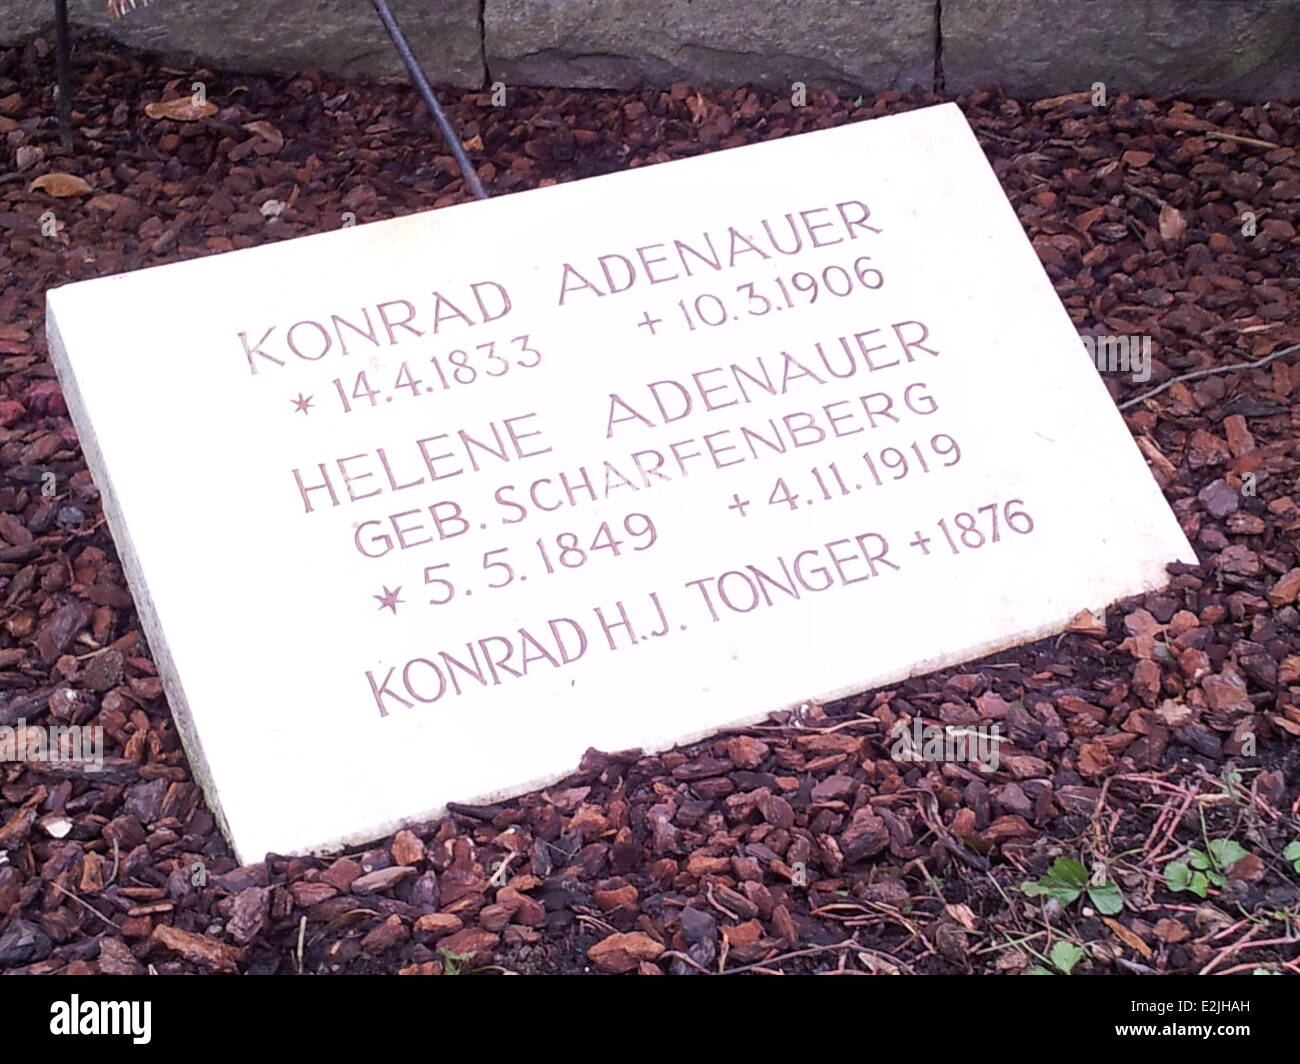 Konrad Adenauer Tomb of the Federal Republic of Germany's first elected chancellor at Waldfriedhof Rhöndorf cemetary. Bad  Where: Honnef, Germany When: 11 Mar 2013 Stock Photo